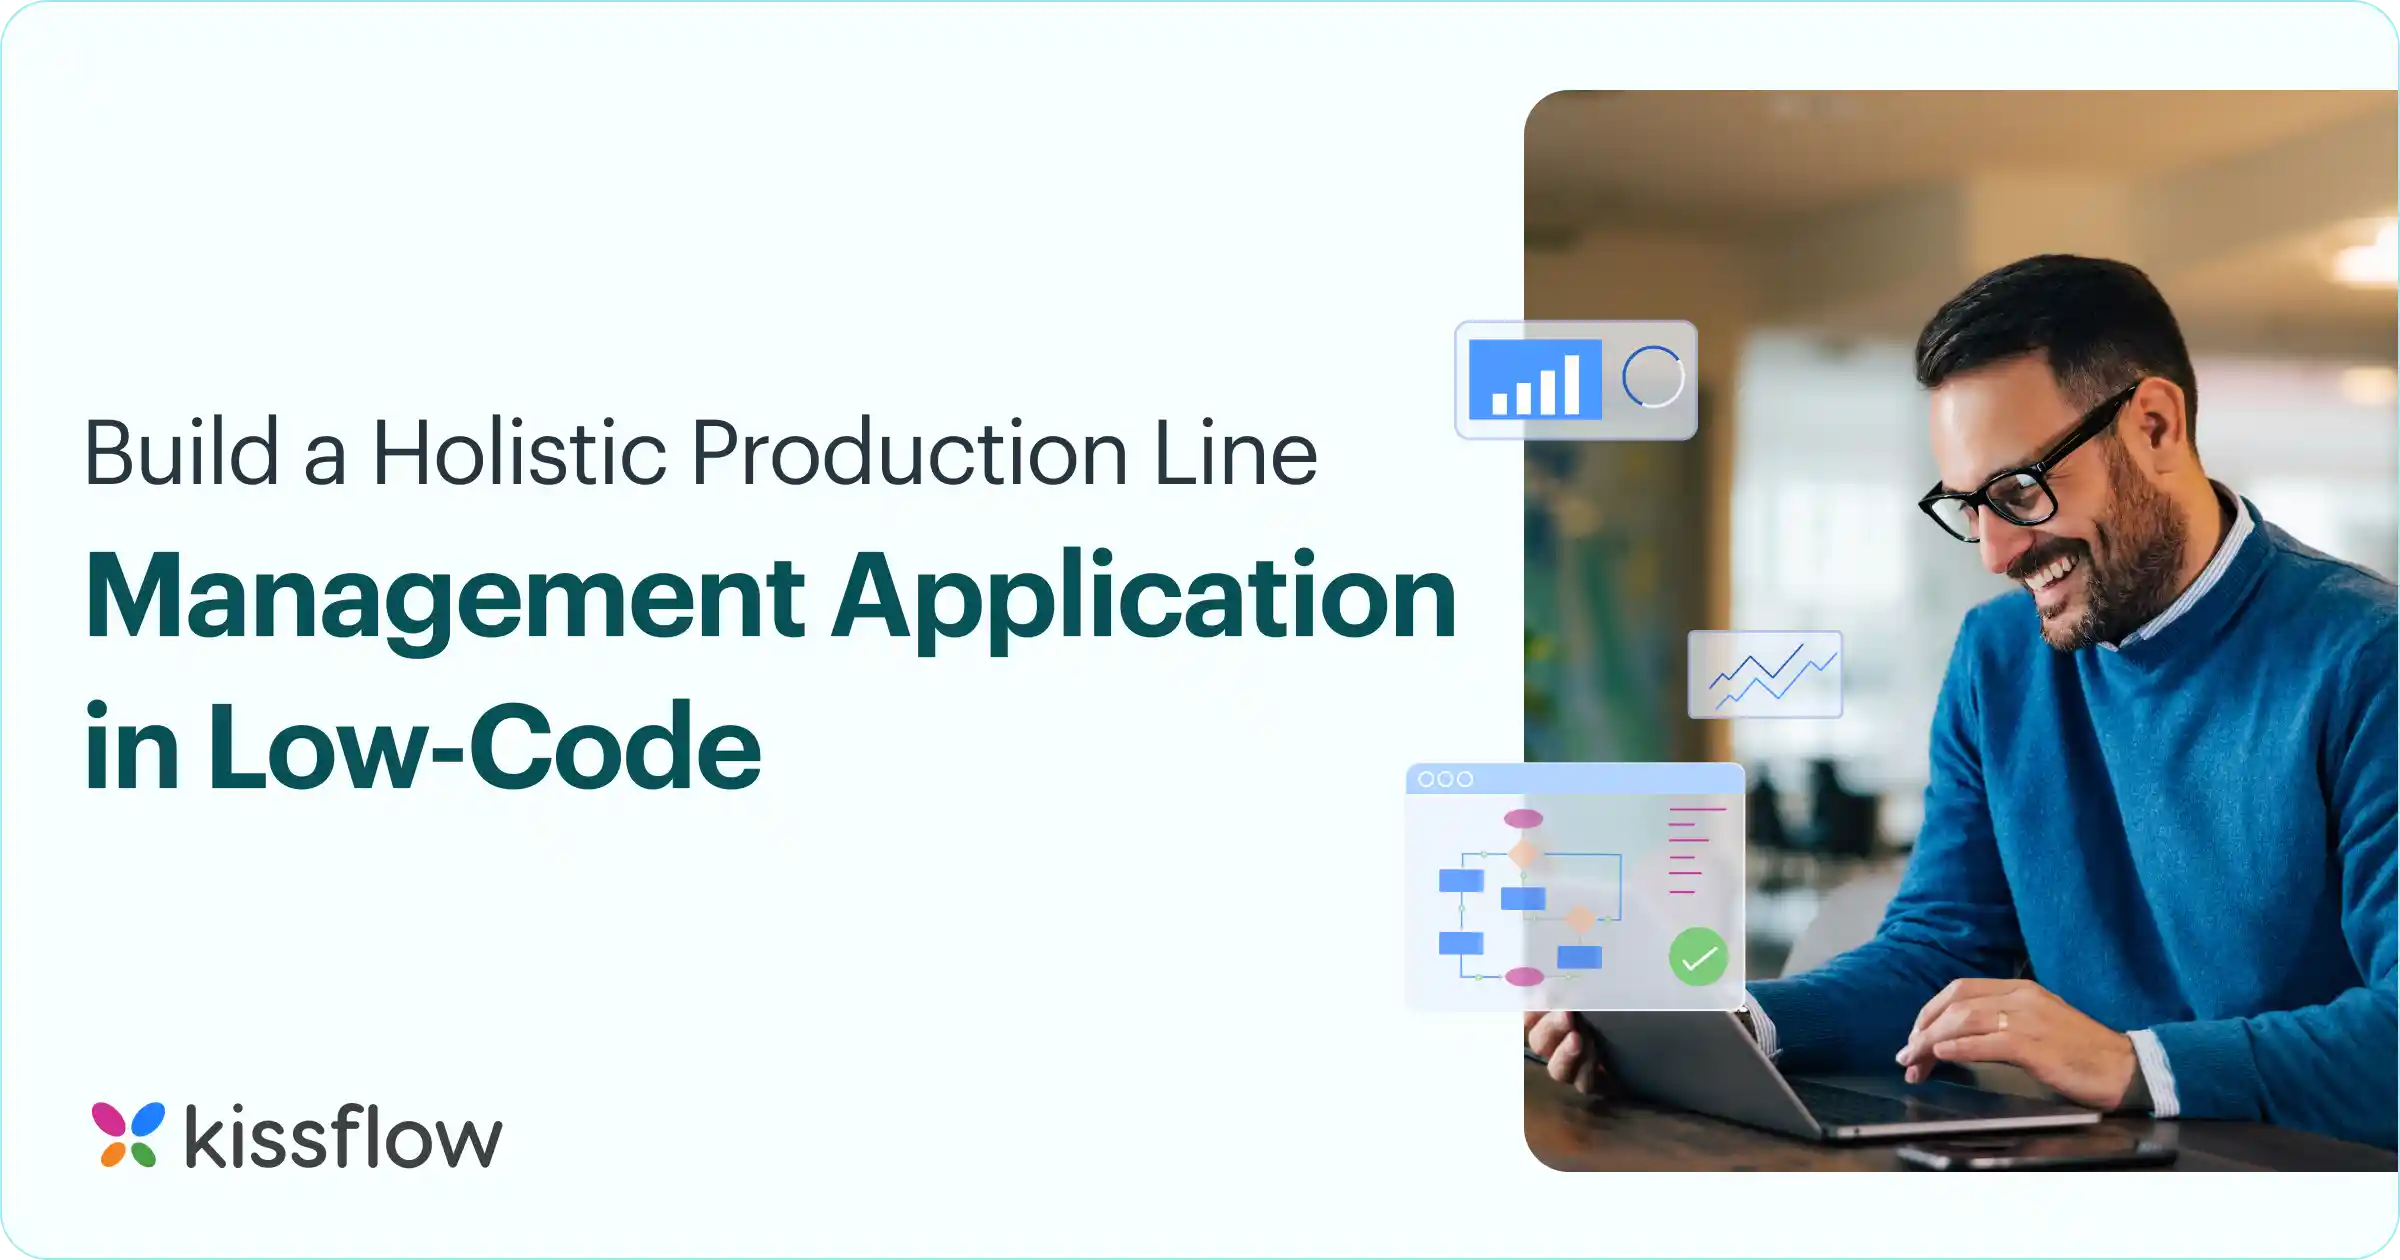 Build a Holistic Production Line Management Application in Low-Code